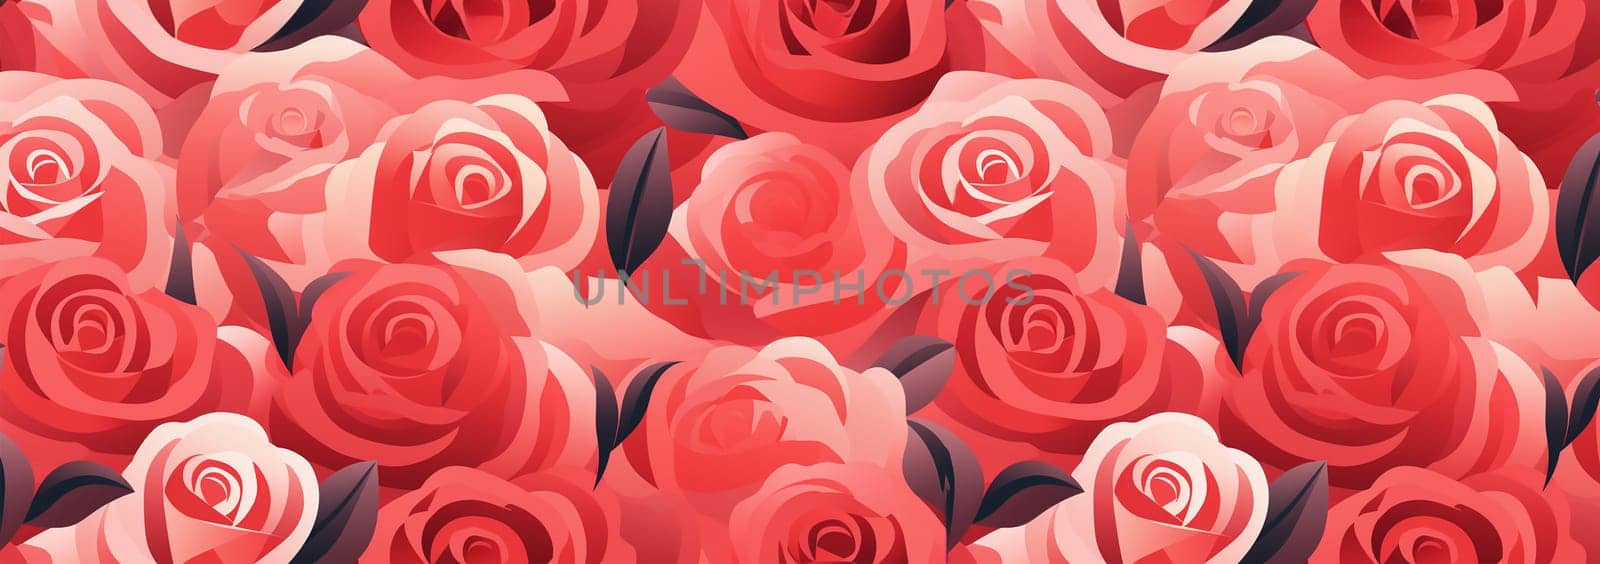 Pastel colored rose pattern background. Seamless pattern floral beautiful pink pastel Rose flowers vintage abstract background.pink illustration hand drawing dry watercolor.for fabric textile design or Product packaging by Annebel146